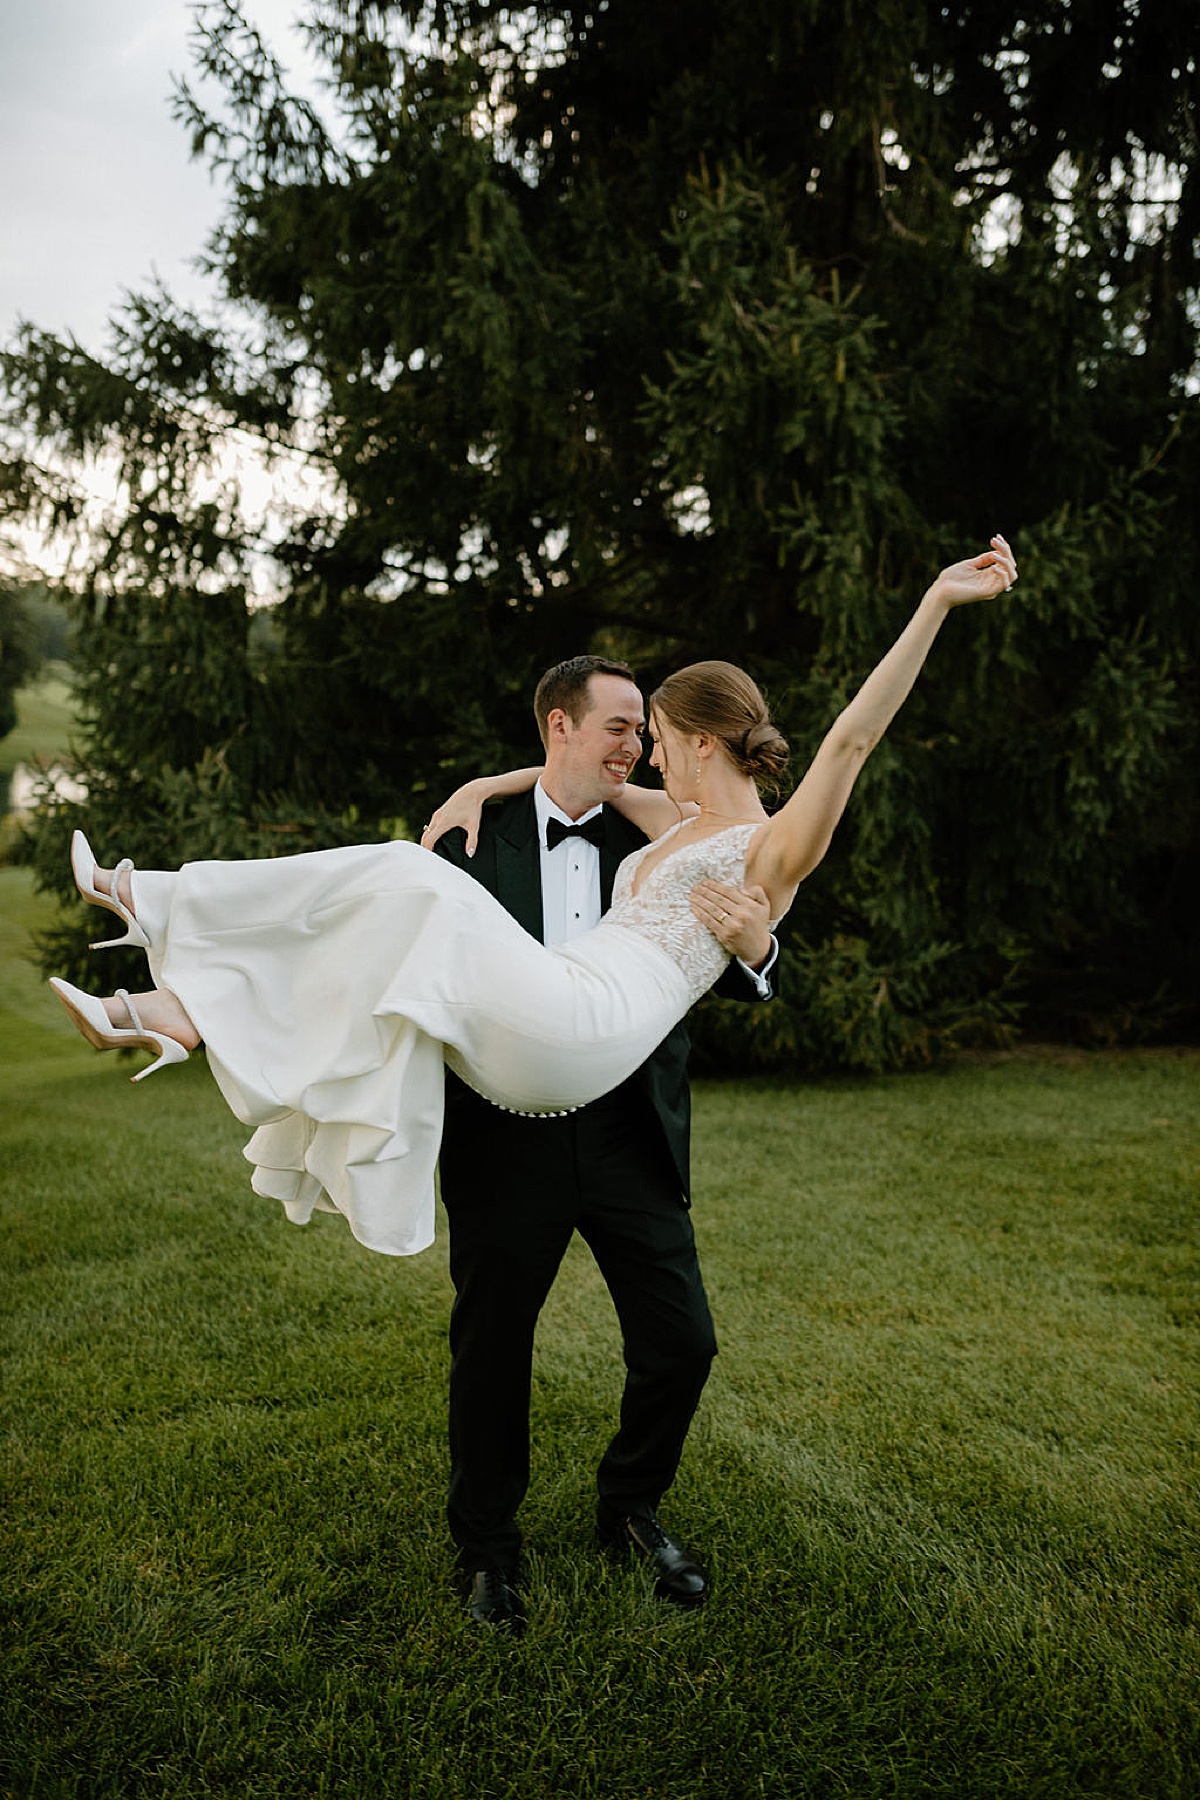 groom sweeps bride off her feet at grassy reception site after wedding ceremony shot by Indigo Lace Collective